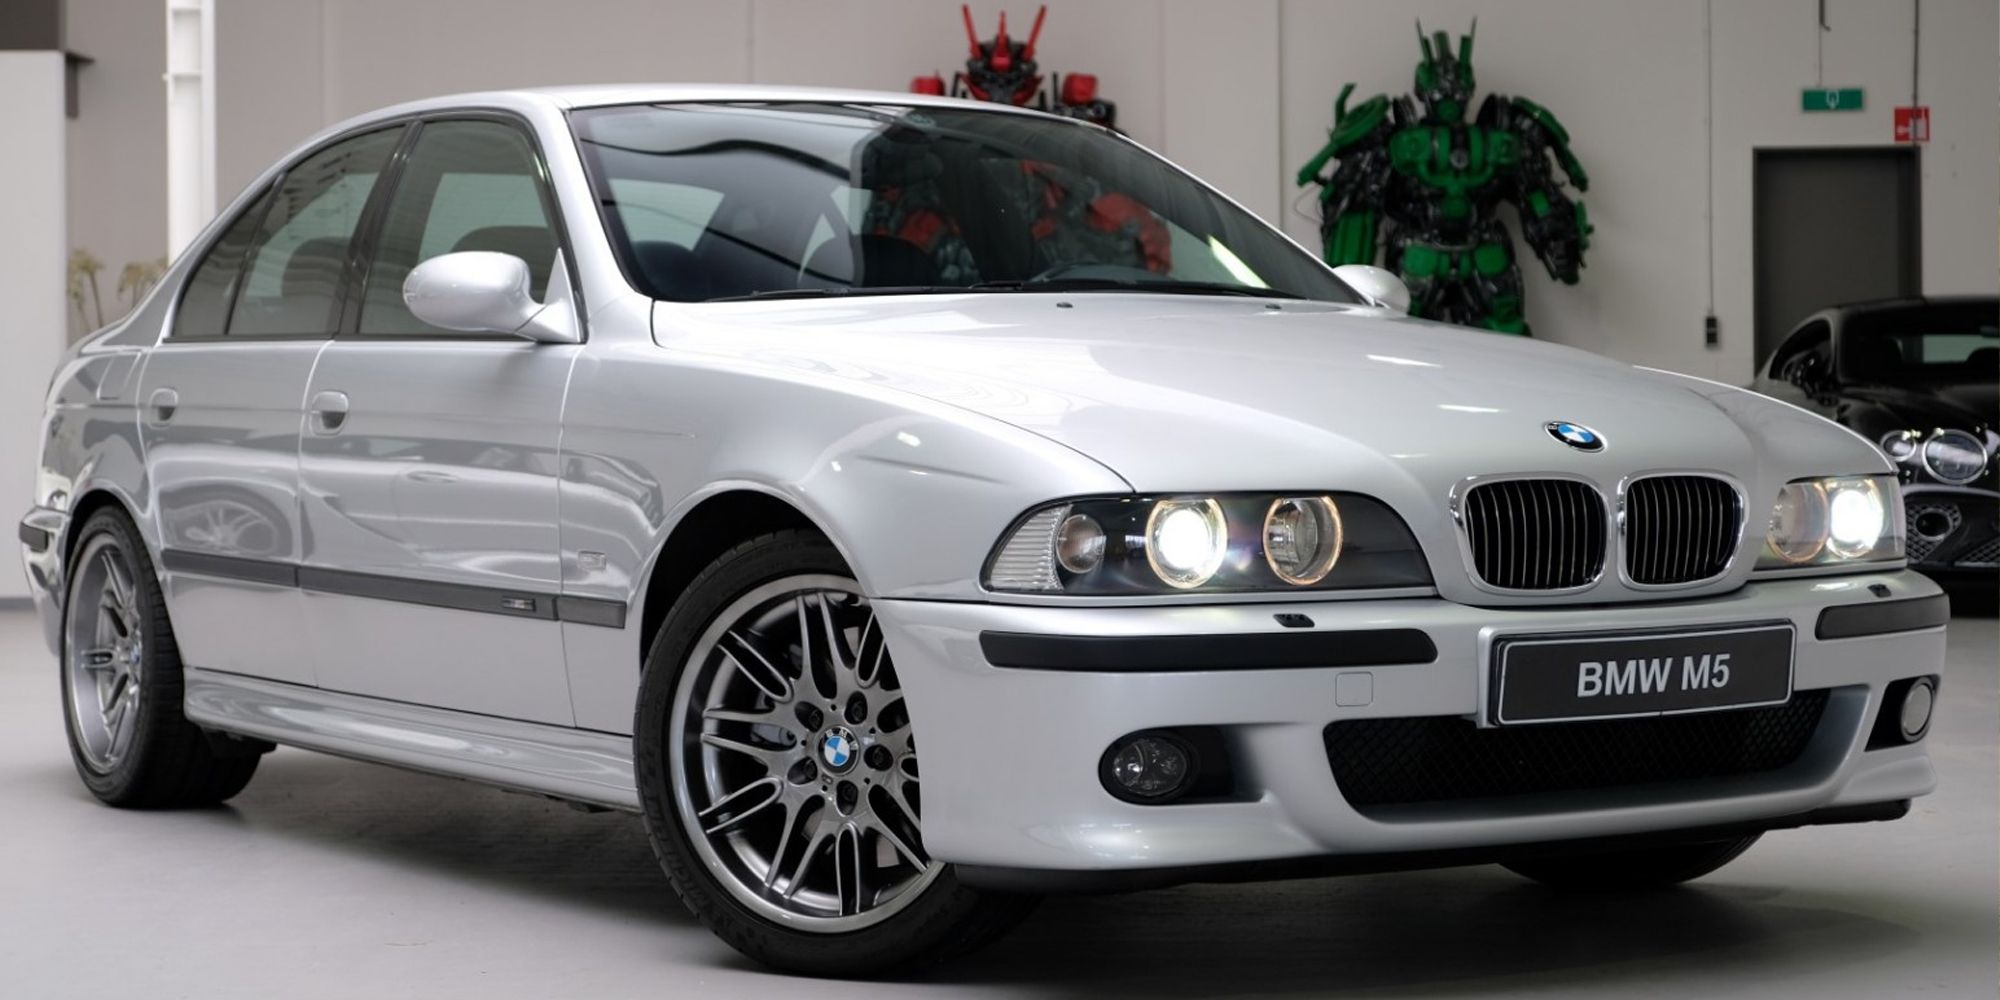 The front of the E39 M5